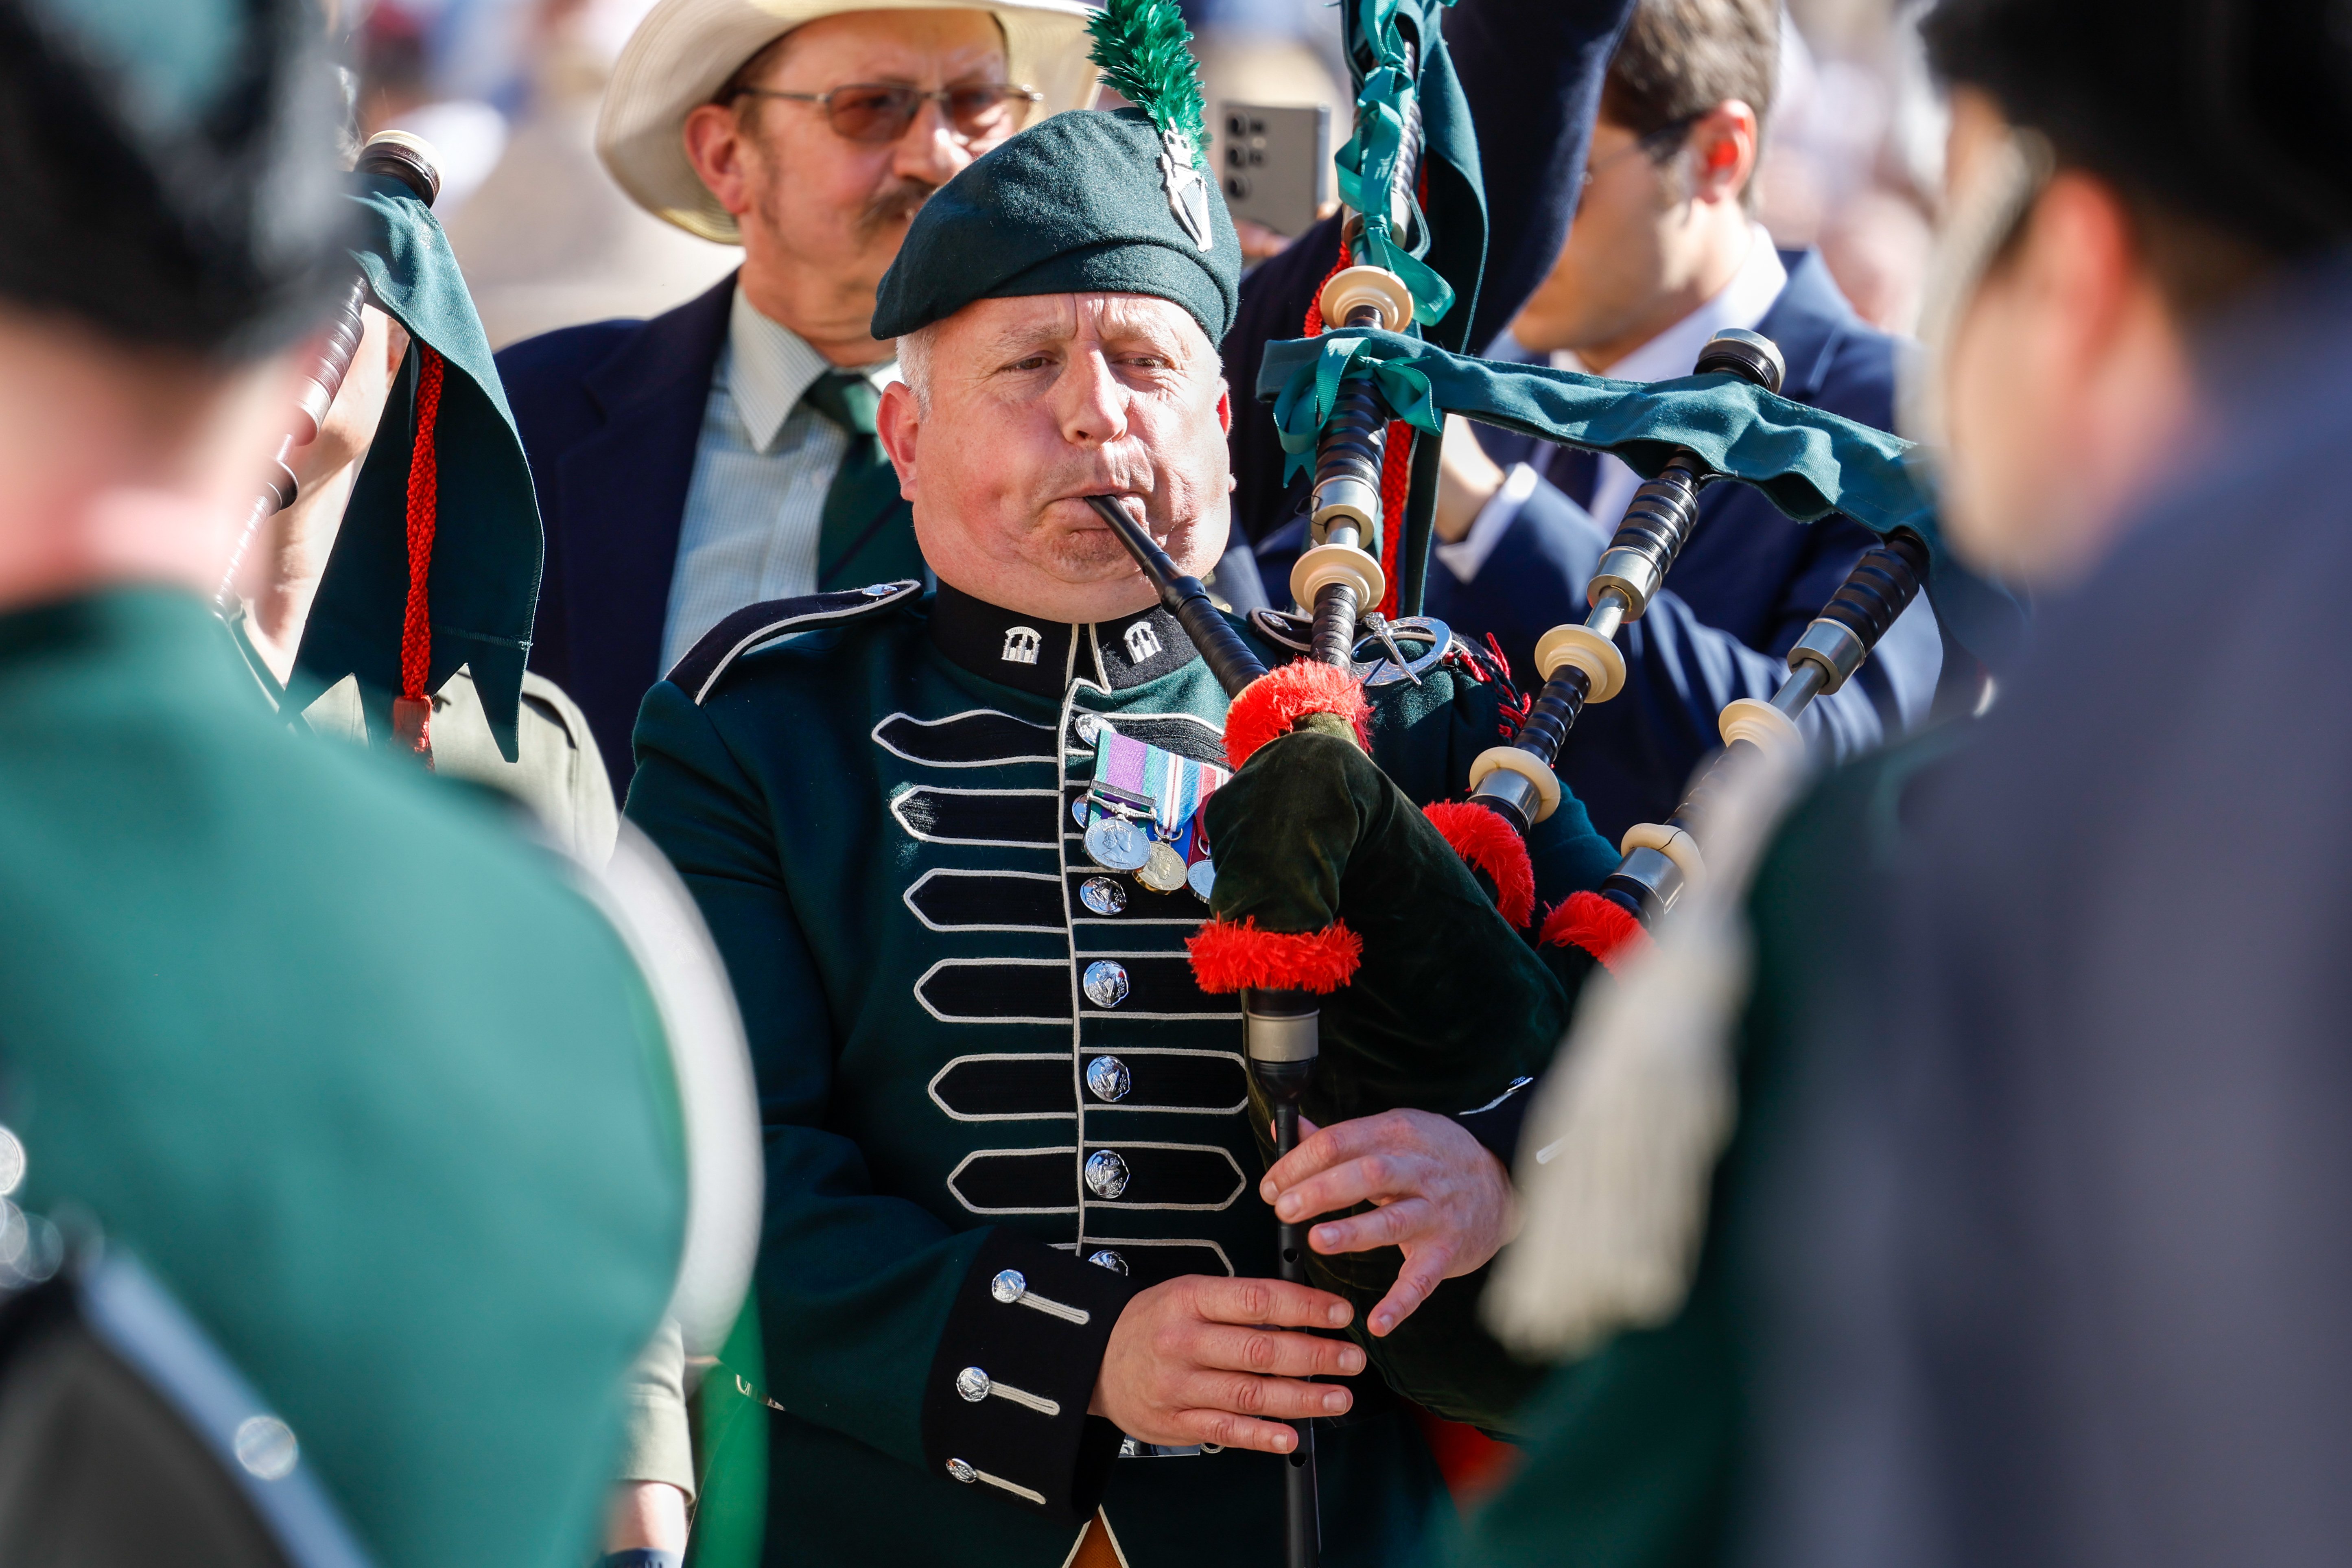 A man plays a bagpipe.